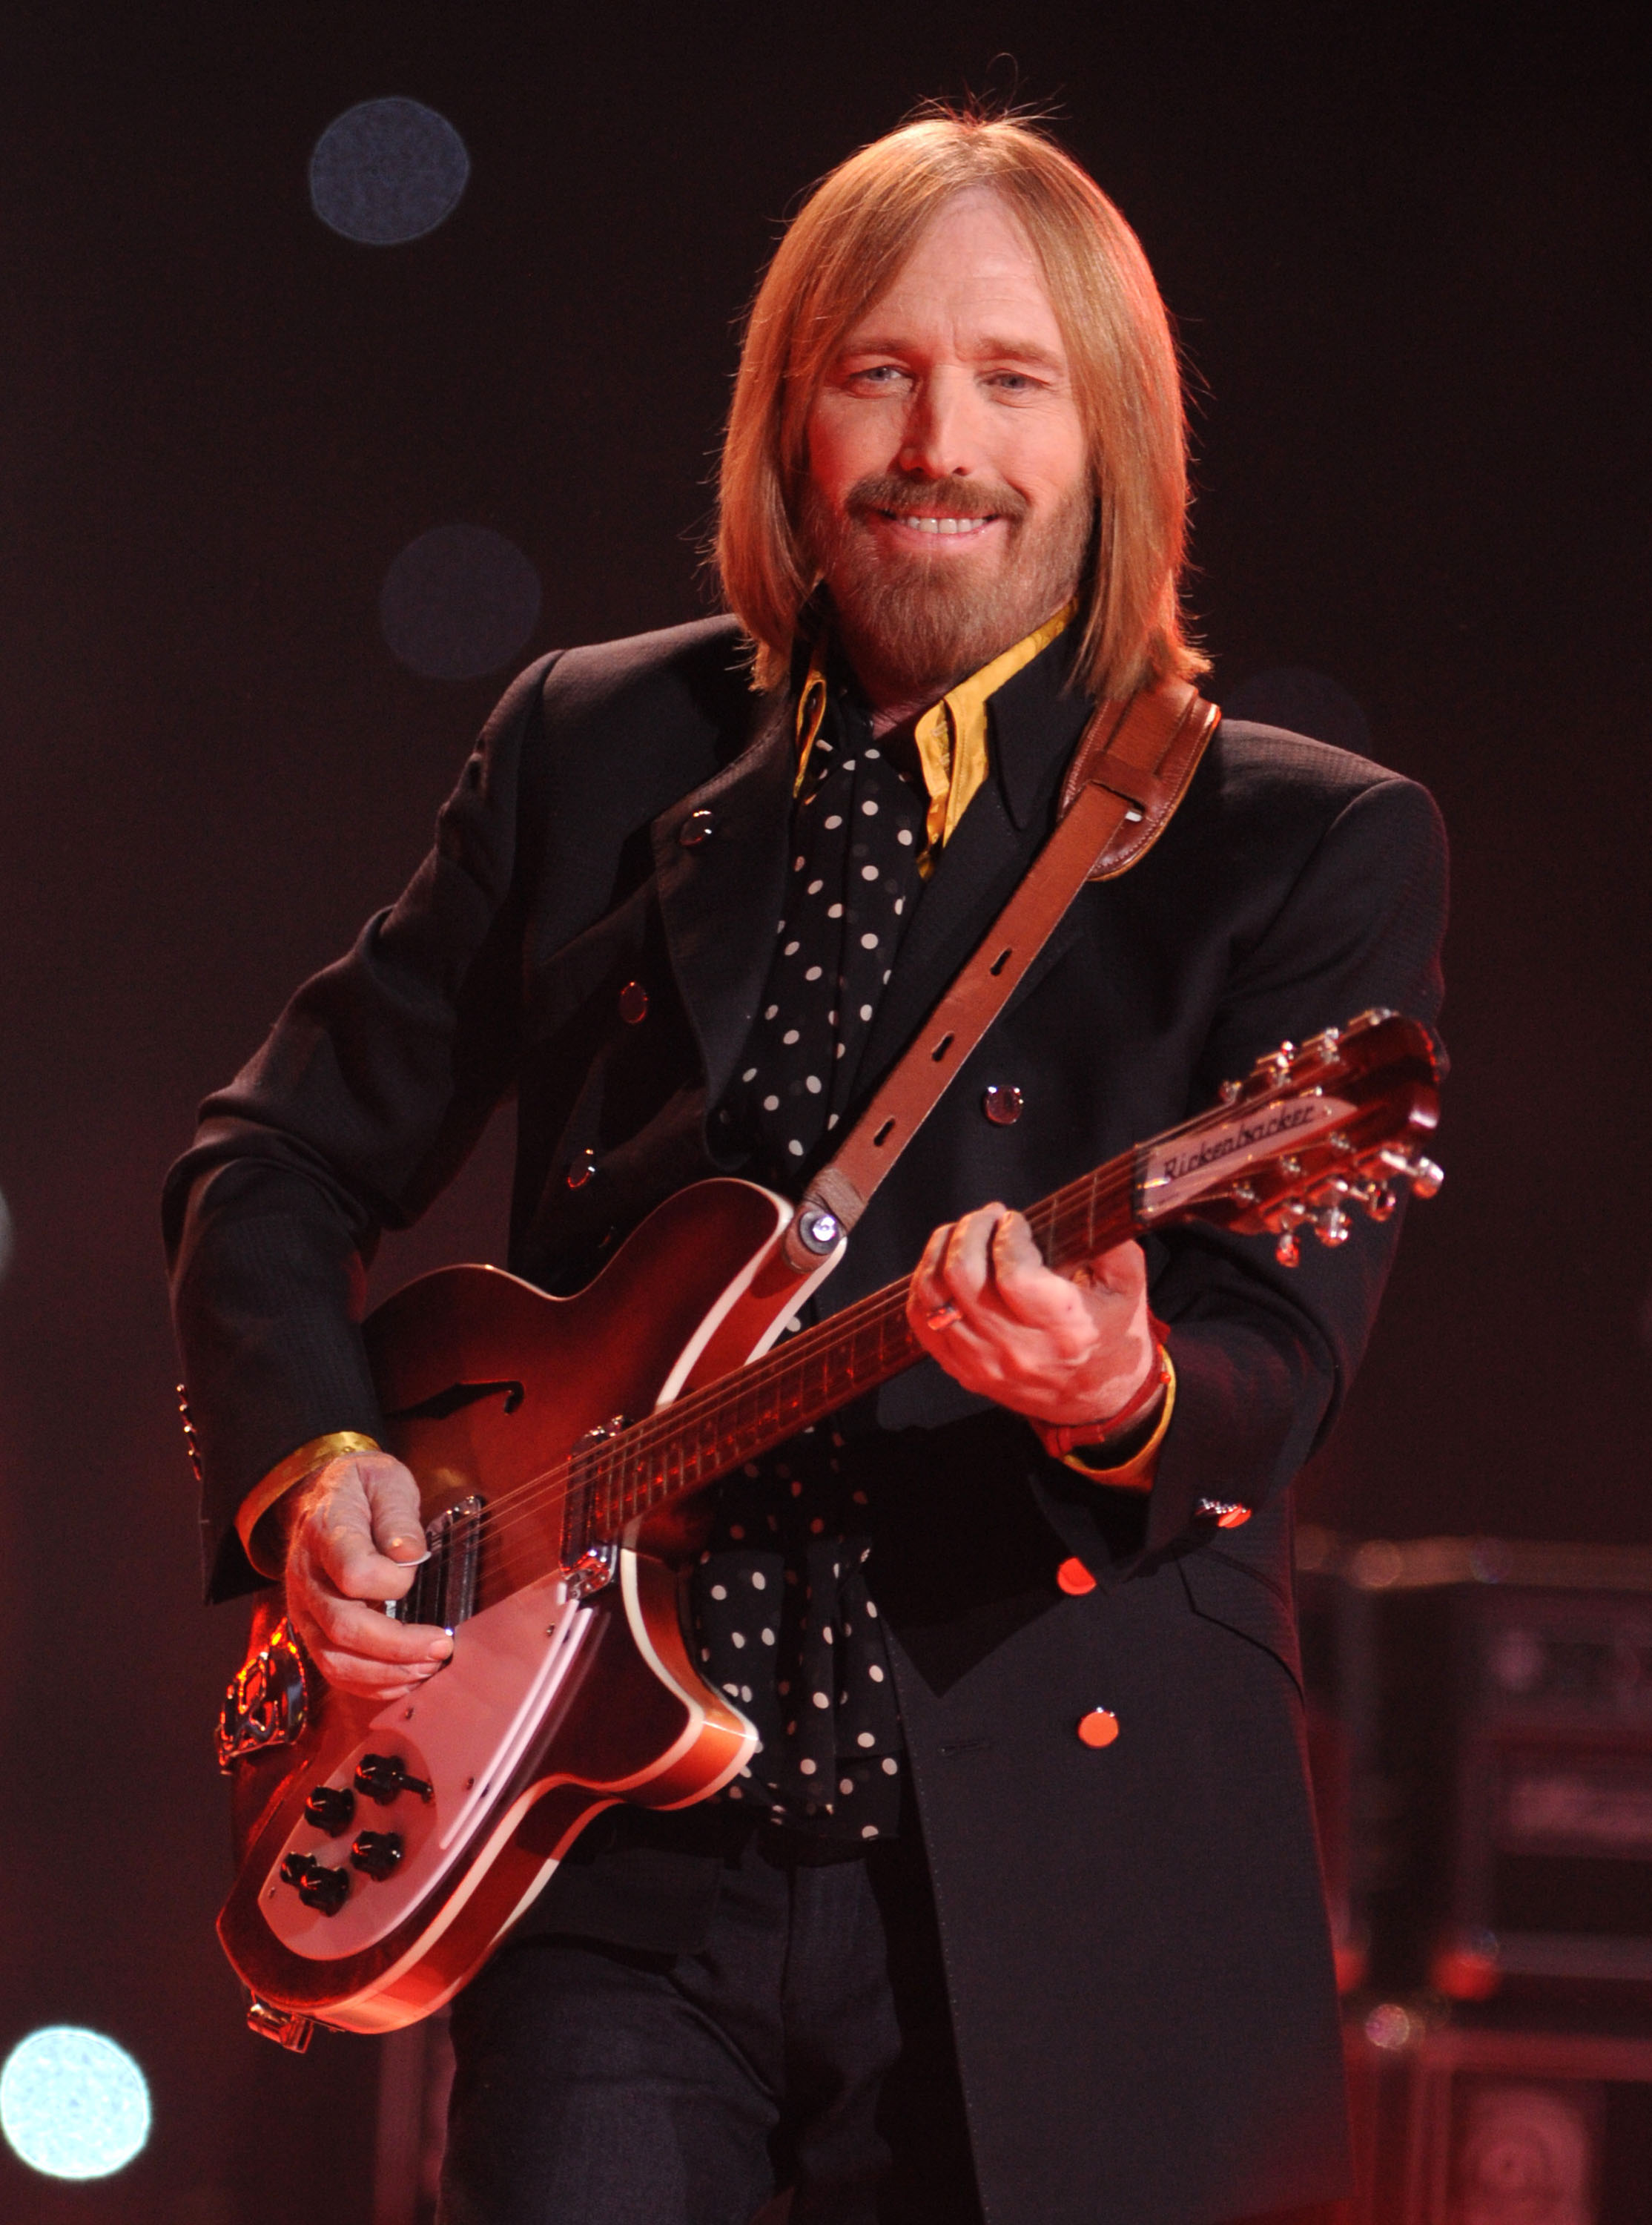 Tom Petty &amp; the Heartbreakers perform during Super Bowl XLII on Feb. 3, 2008 in Glendale, Ariz.